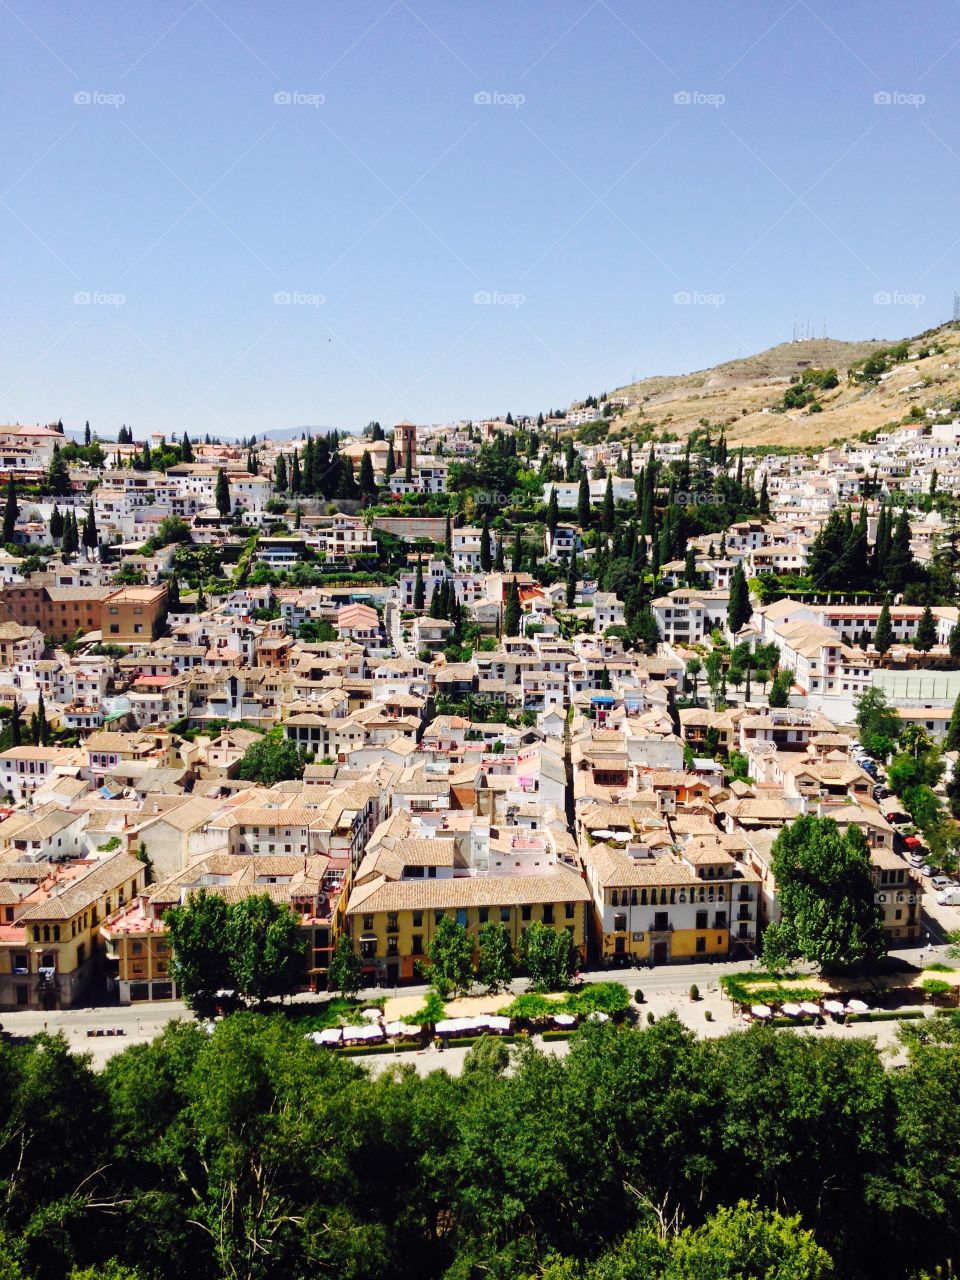 View from the Alhambra. View of Albycib, Granada, seen from the Alhambra